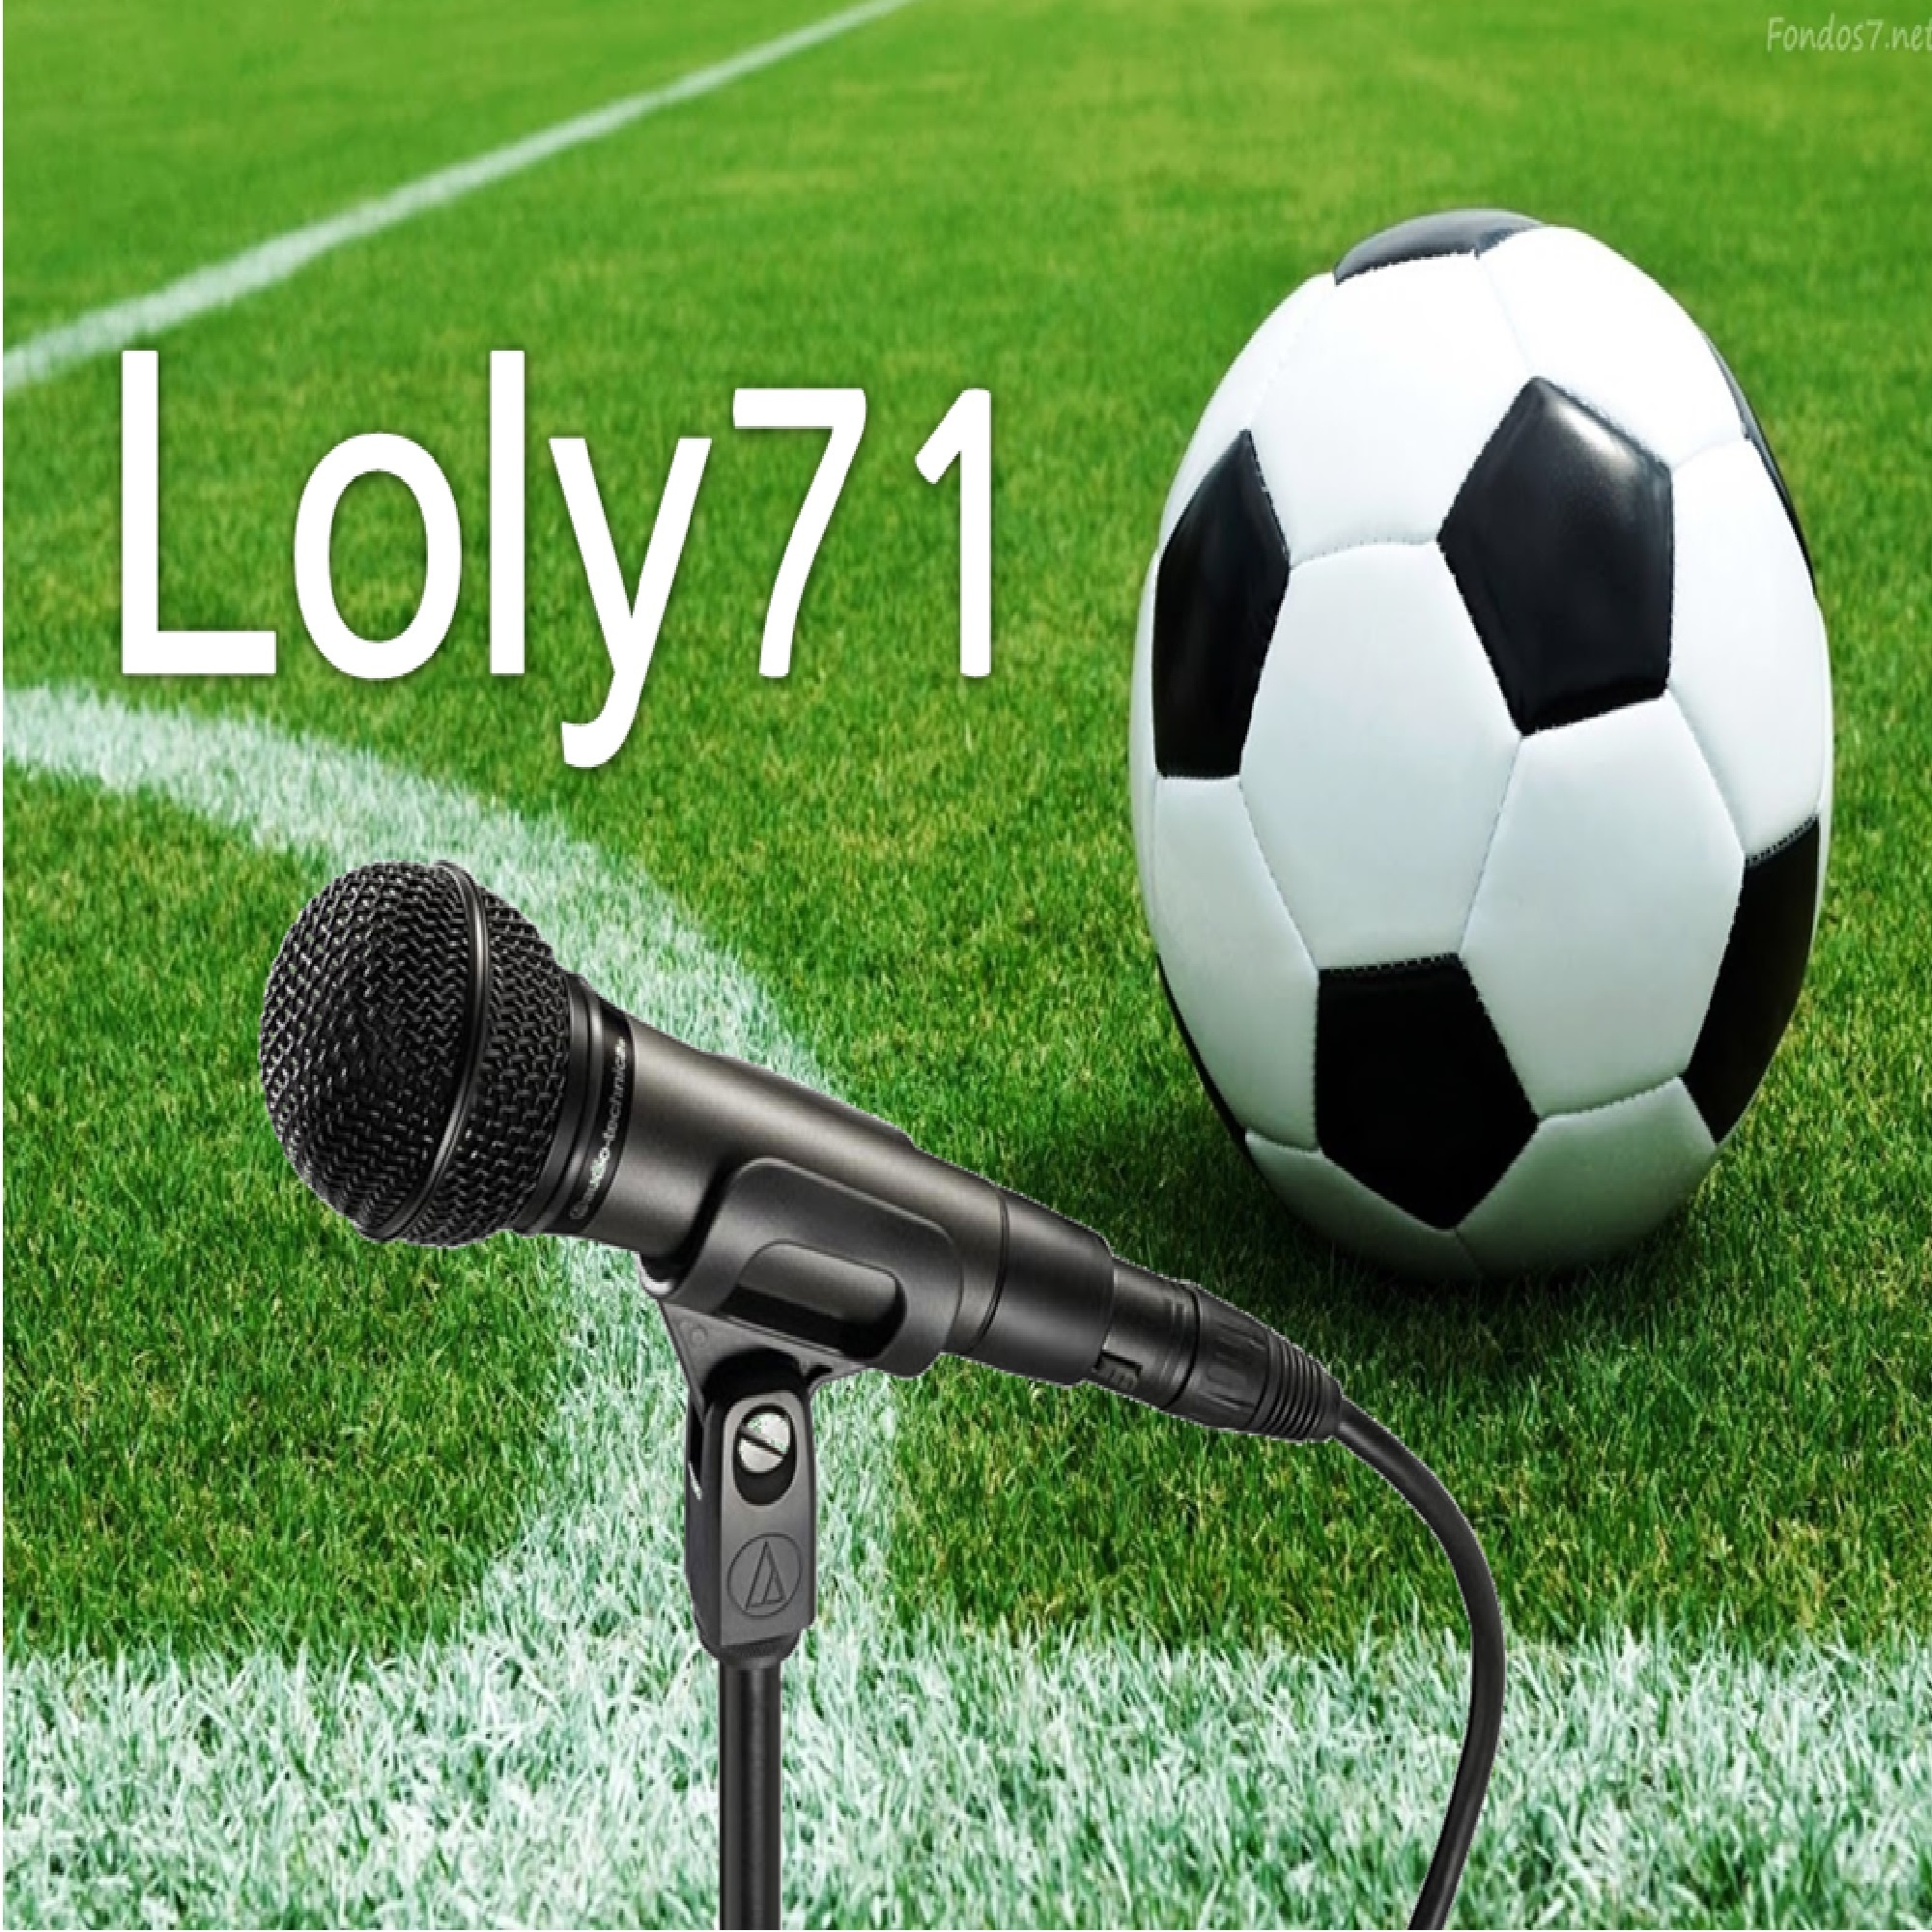 loly71